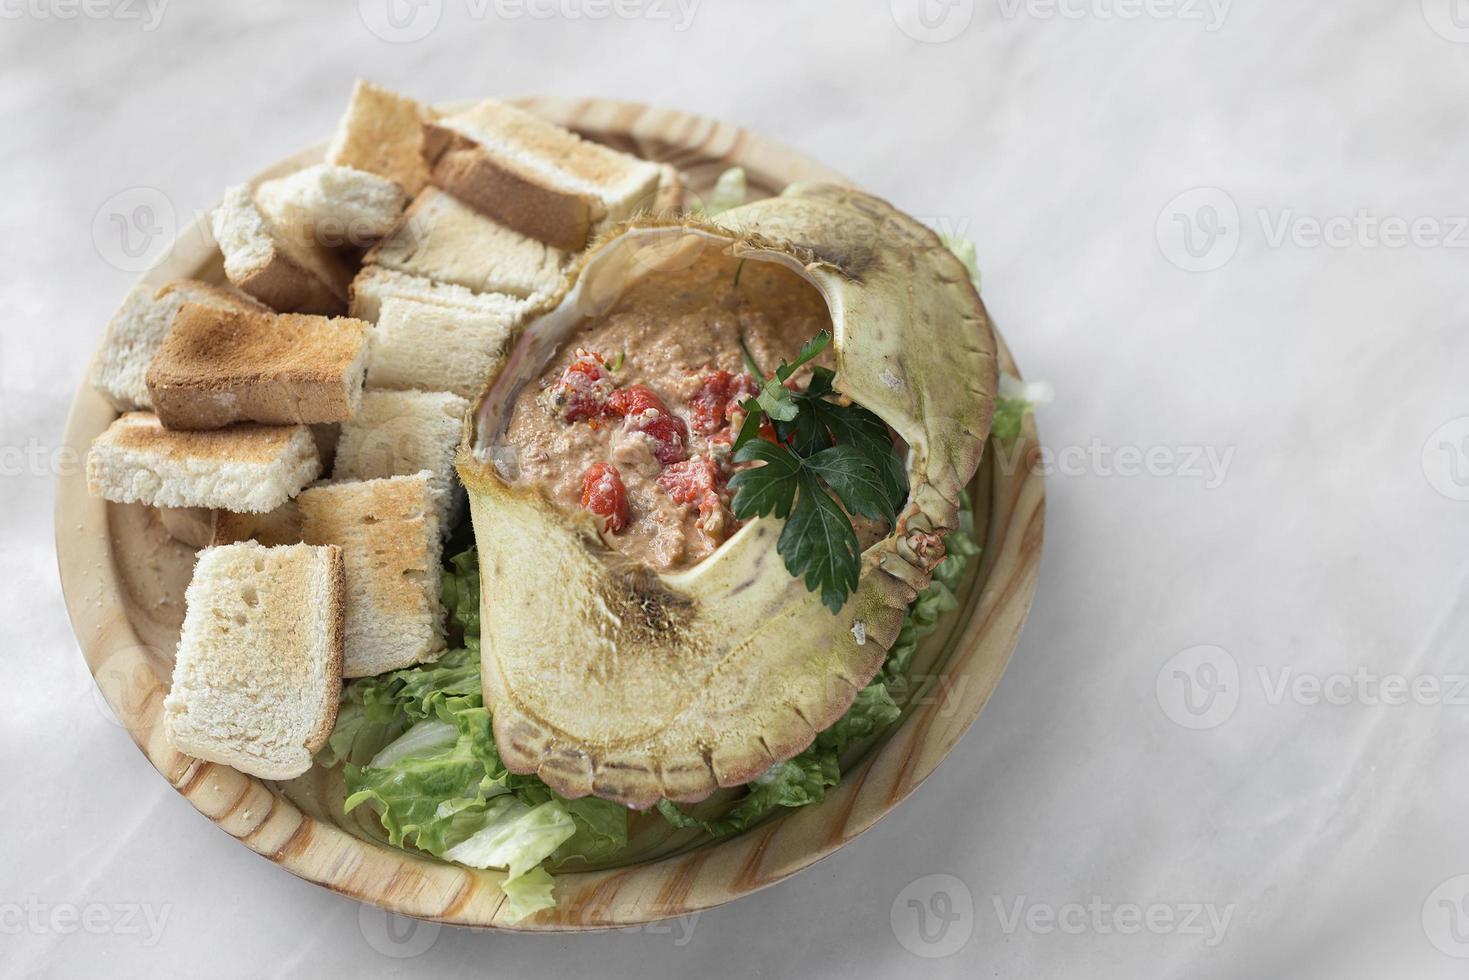 portuguese crab meat mayonnaise mousse seafood tapas in lisbon restaurant photo